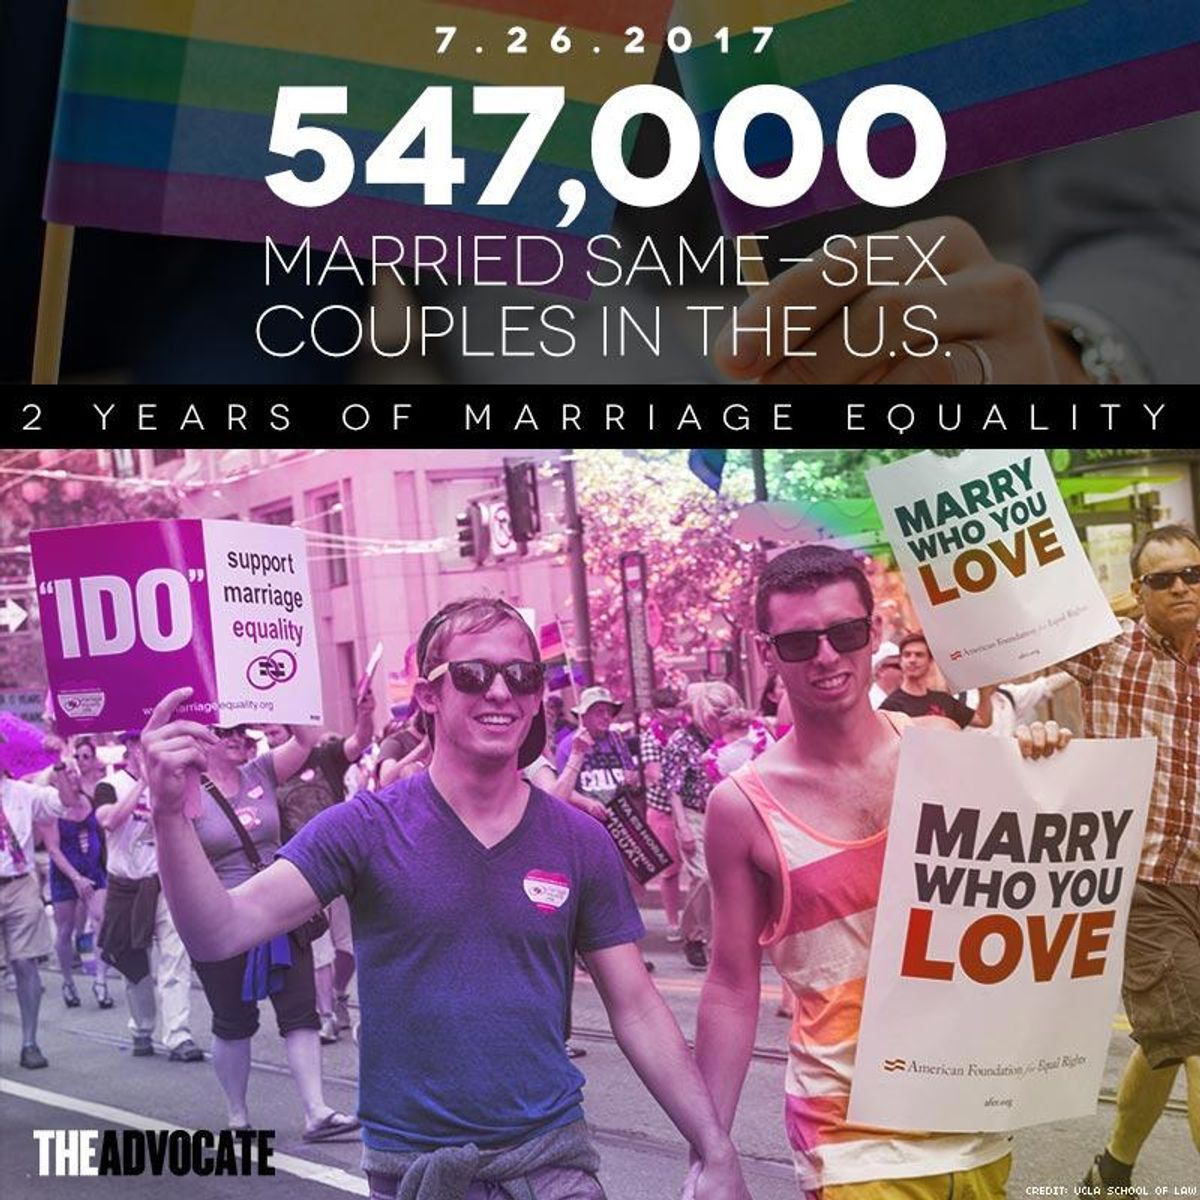 Why June 26 Is a Momentous Day for LGBT Equality